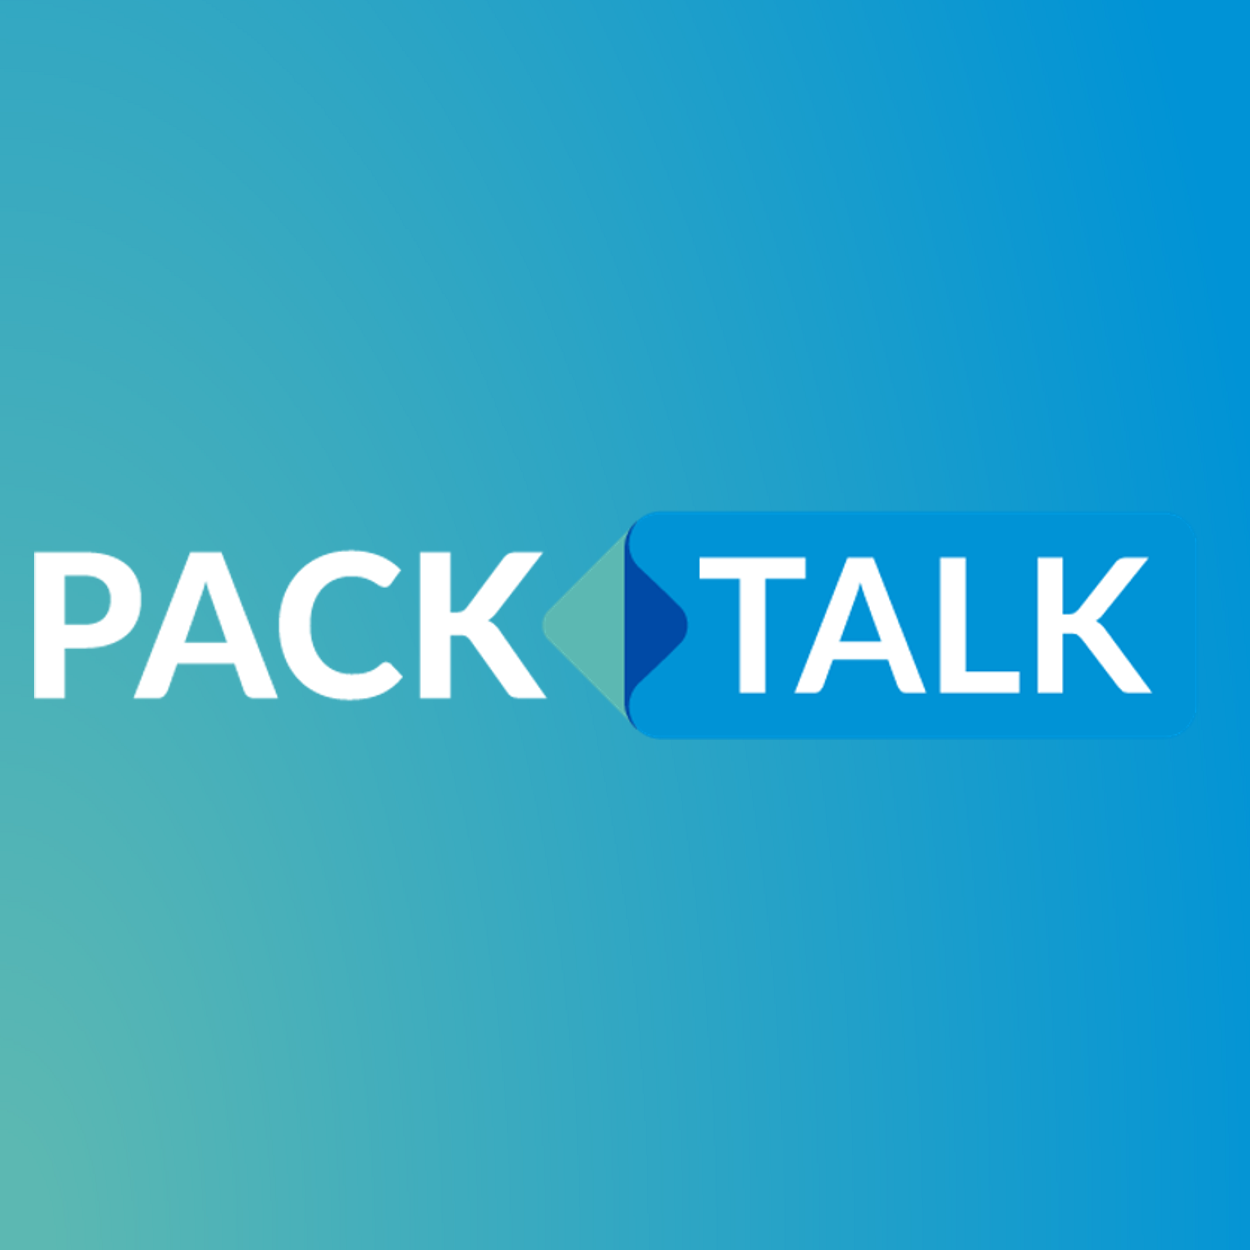 Visit PackTalk for the latest news, innovations, & trends in healthcare